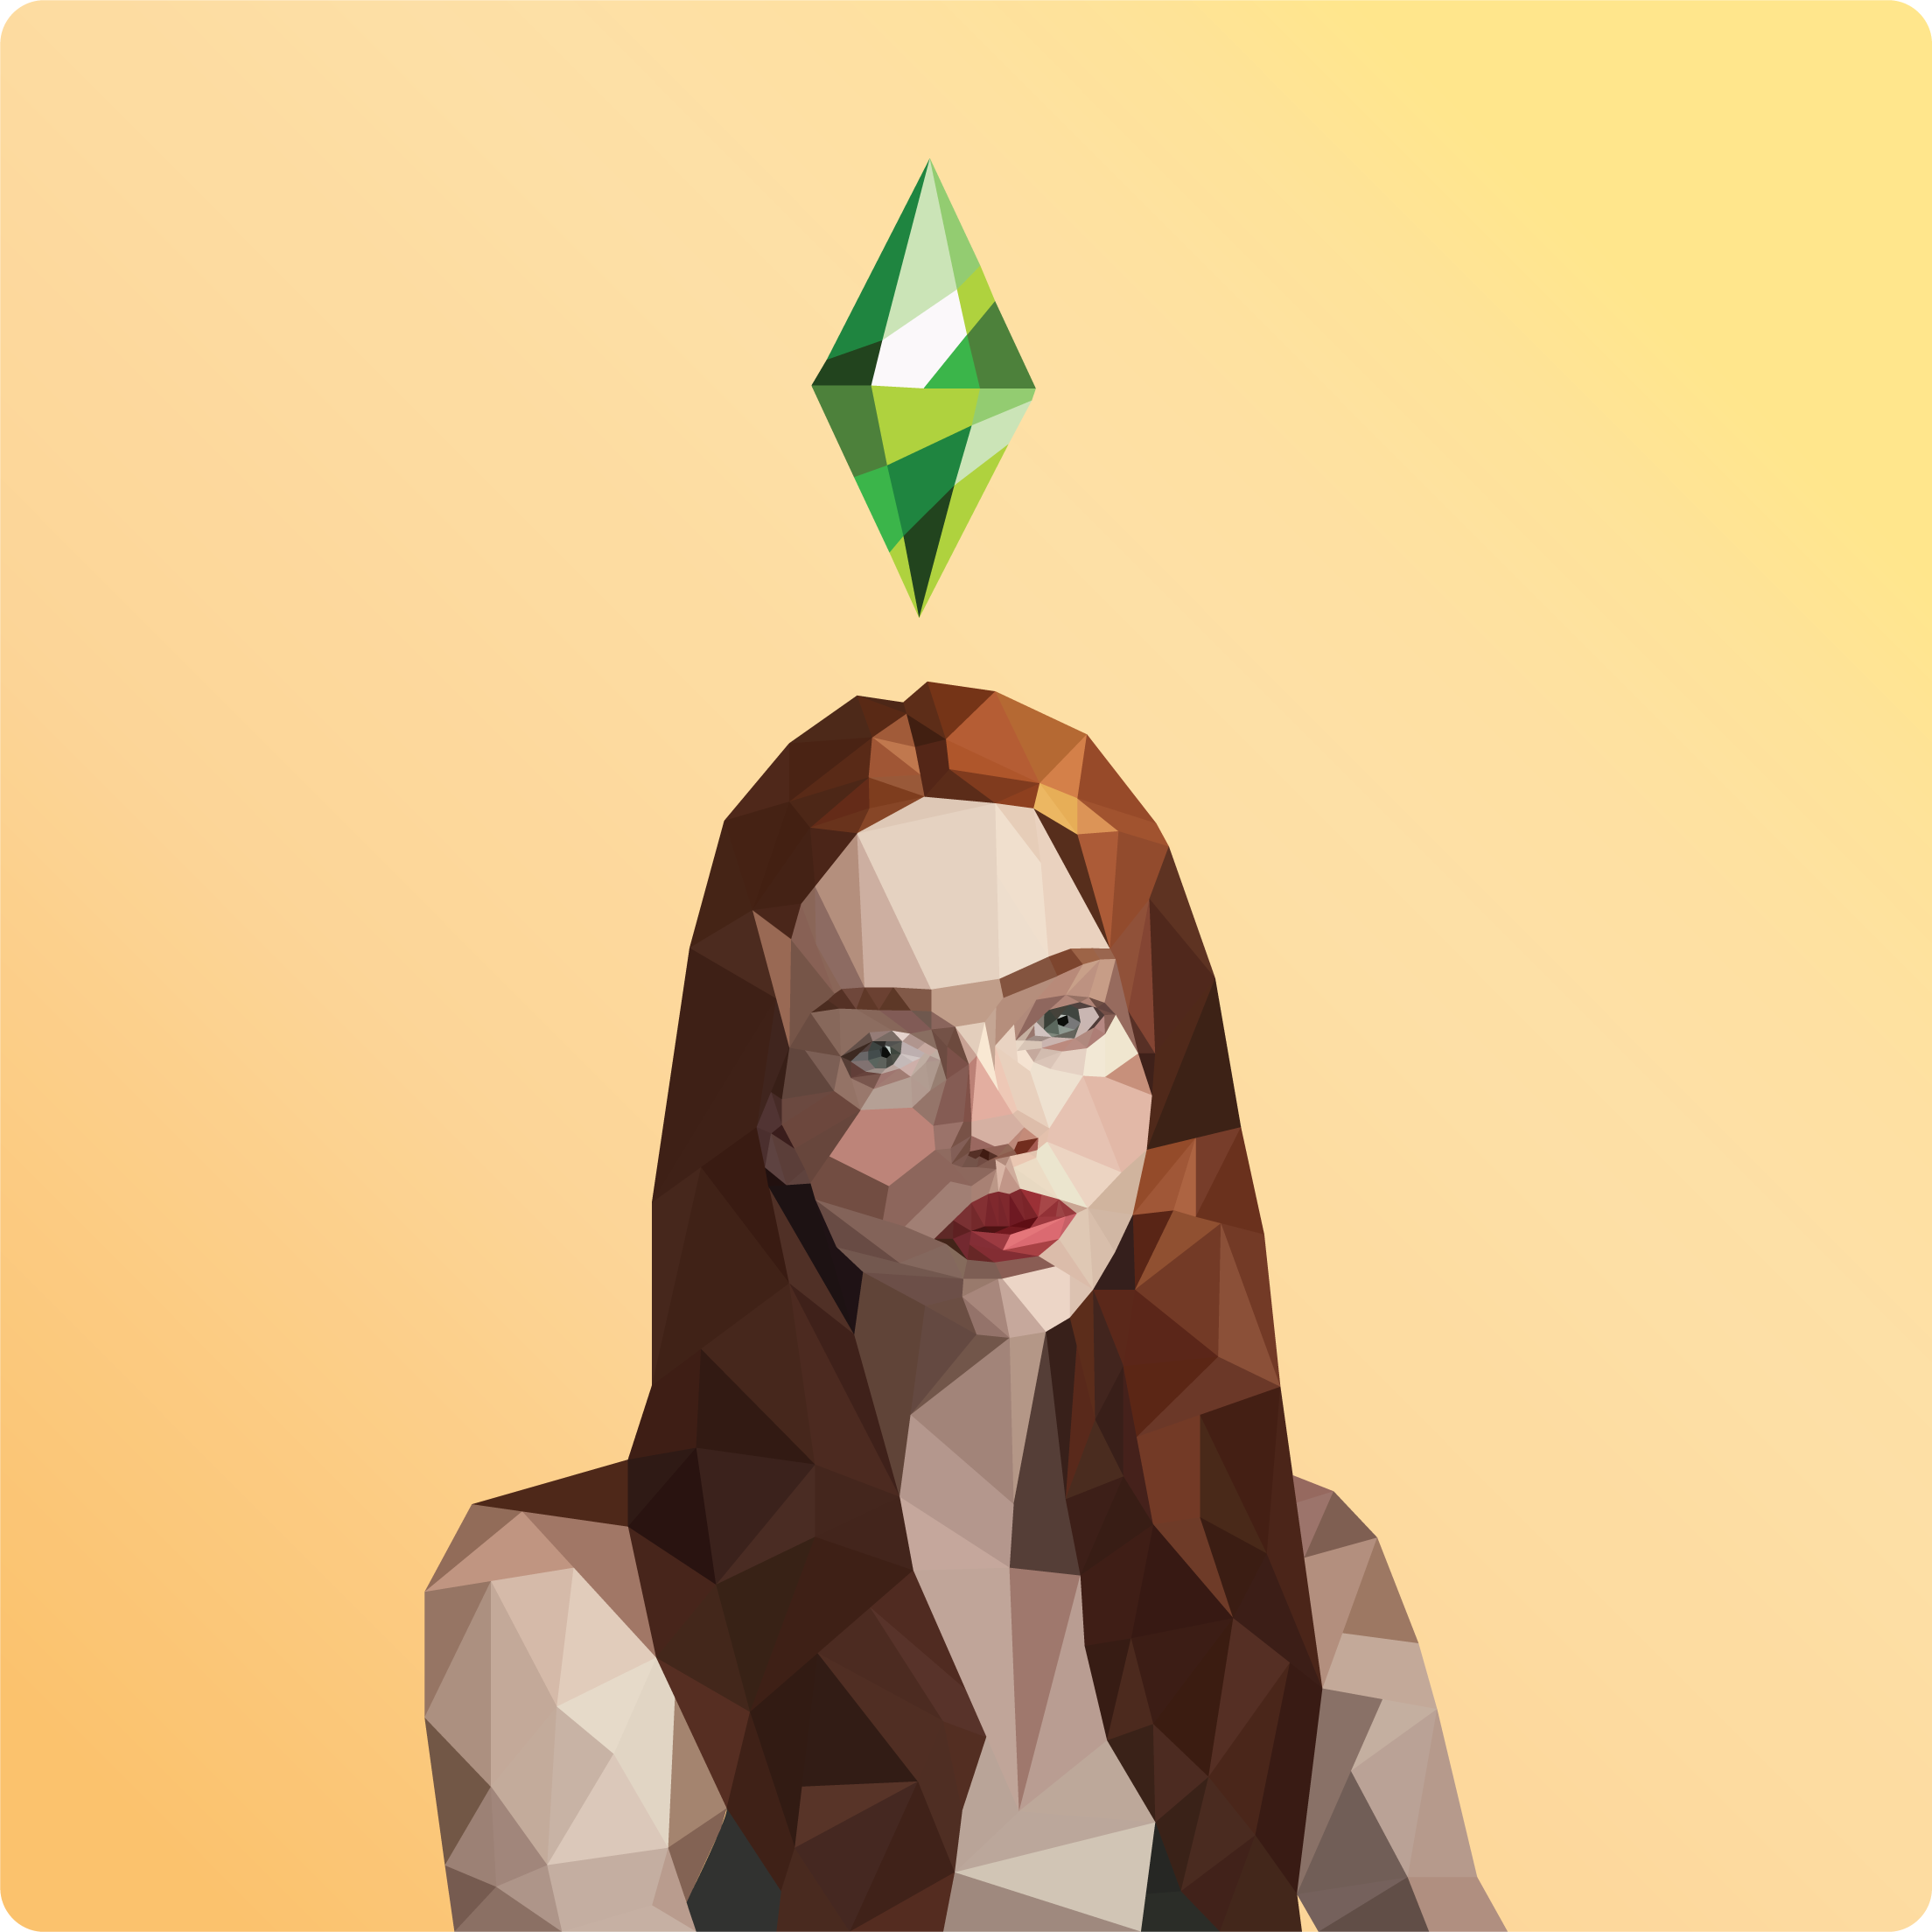 Sims character in Low Poly style cover image.